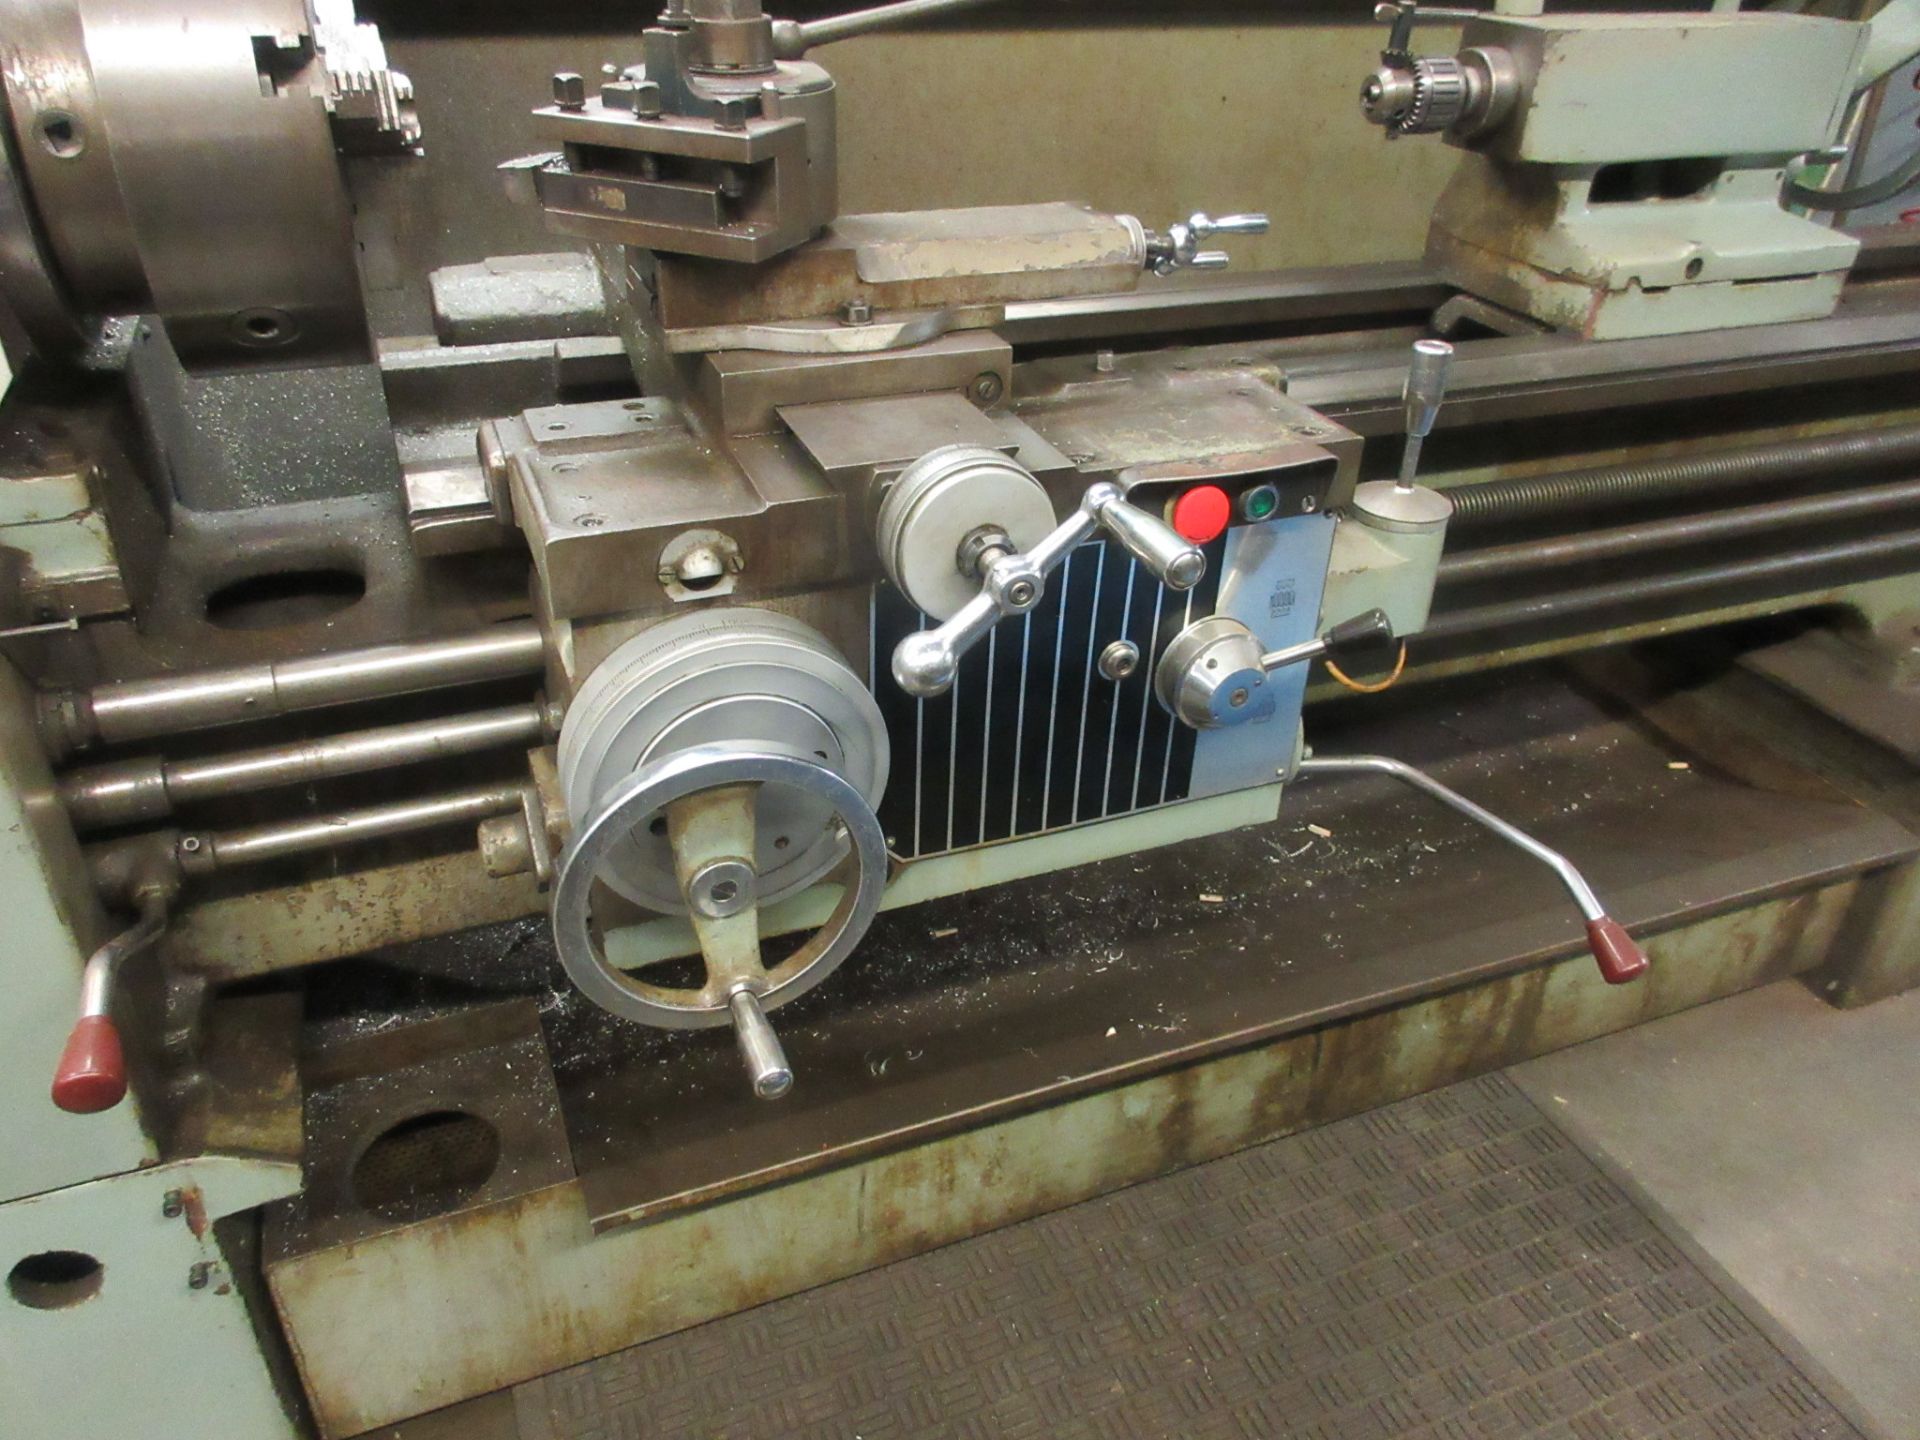 GWM S1 LATHE, 12” 3-JAW CHUCK, 20” SWING, 80” BED, 65” BETWEEN CENTERS, TAILSTOCK, TOOL POST, SPEEDS - Image 13 of 17